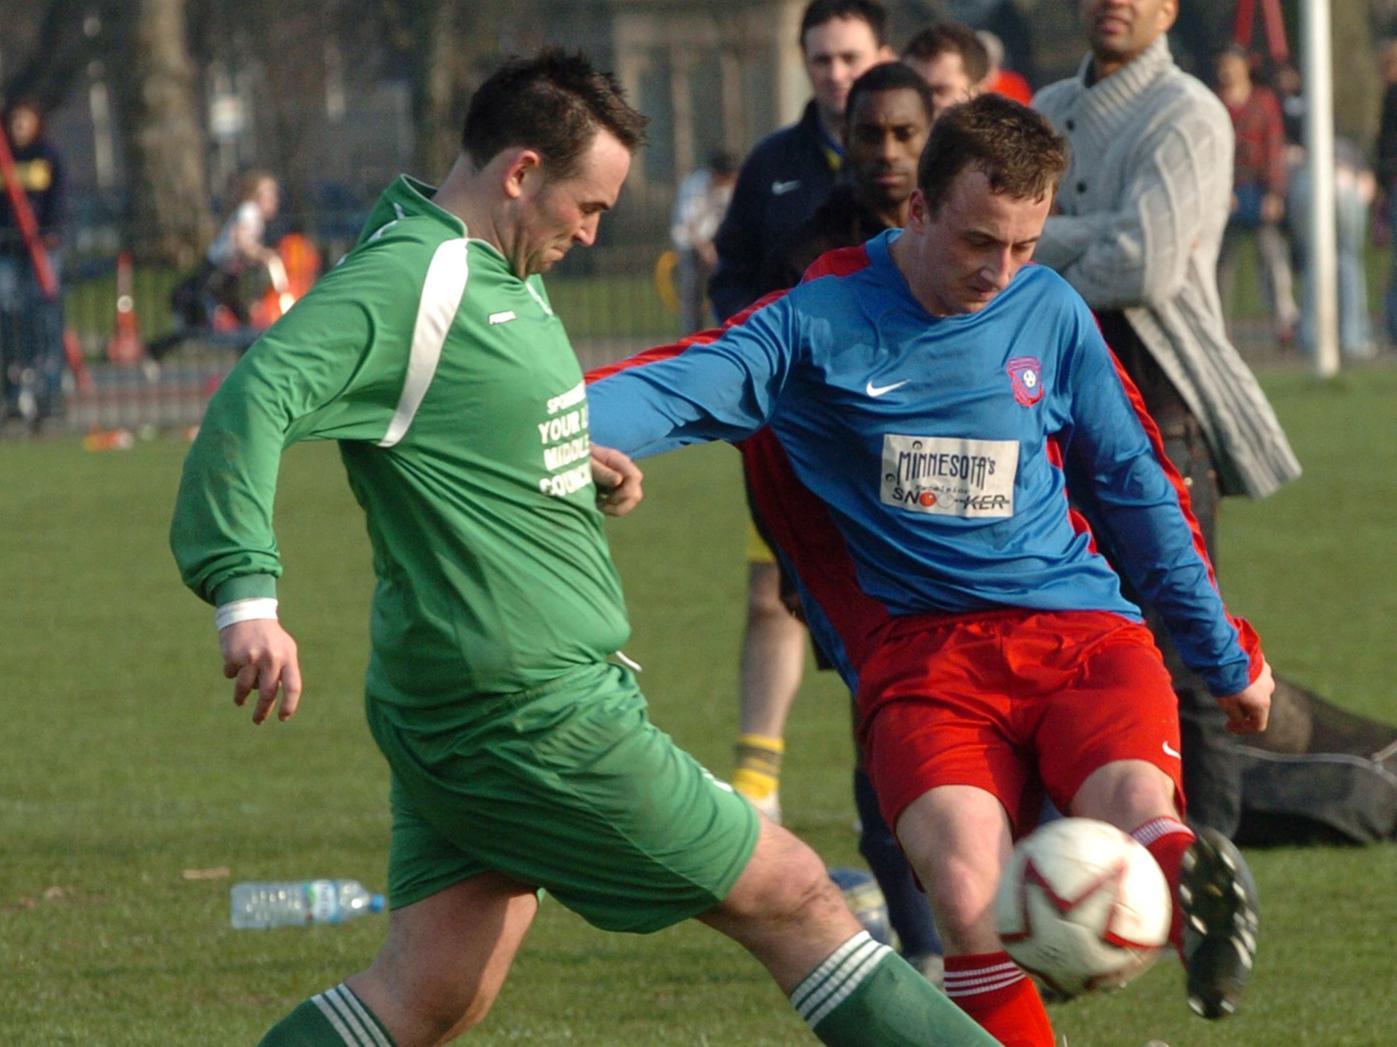 Mark Pearson of Sporting Armley crosses the ball as he is challenged by Simon Johnson of Middleton Park.